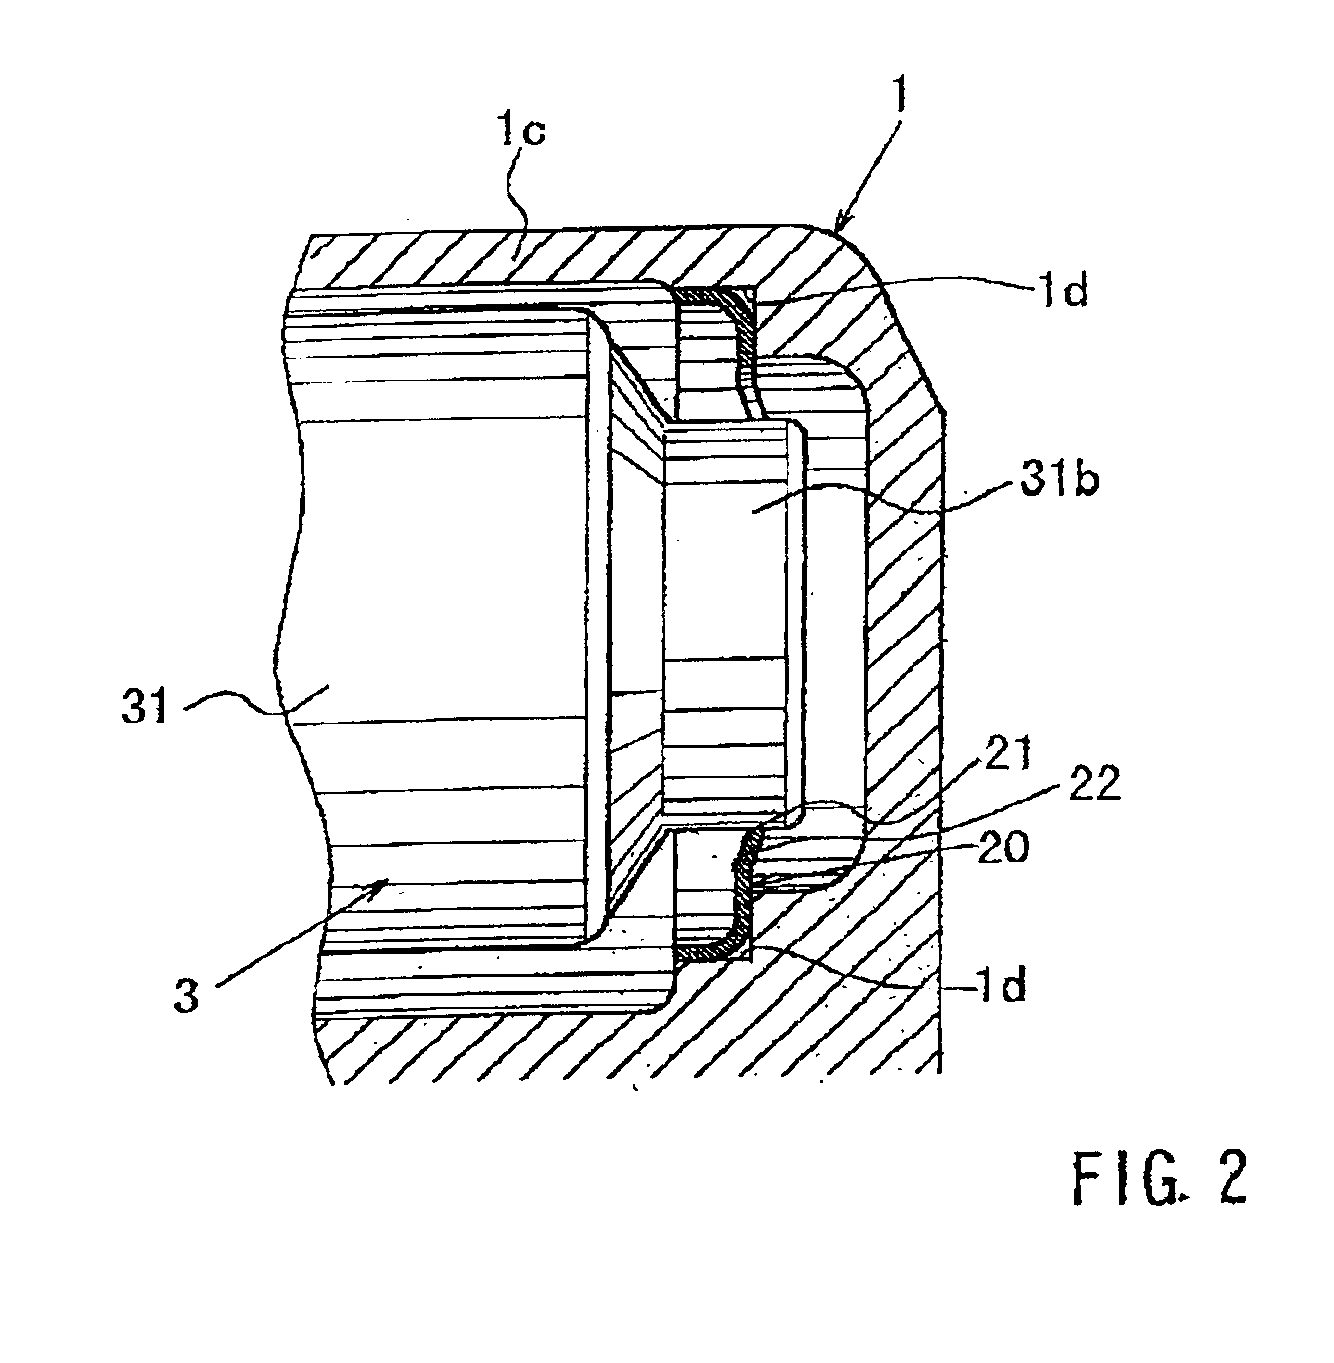 Throttle devices having motors supported by elastic, metallic support members